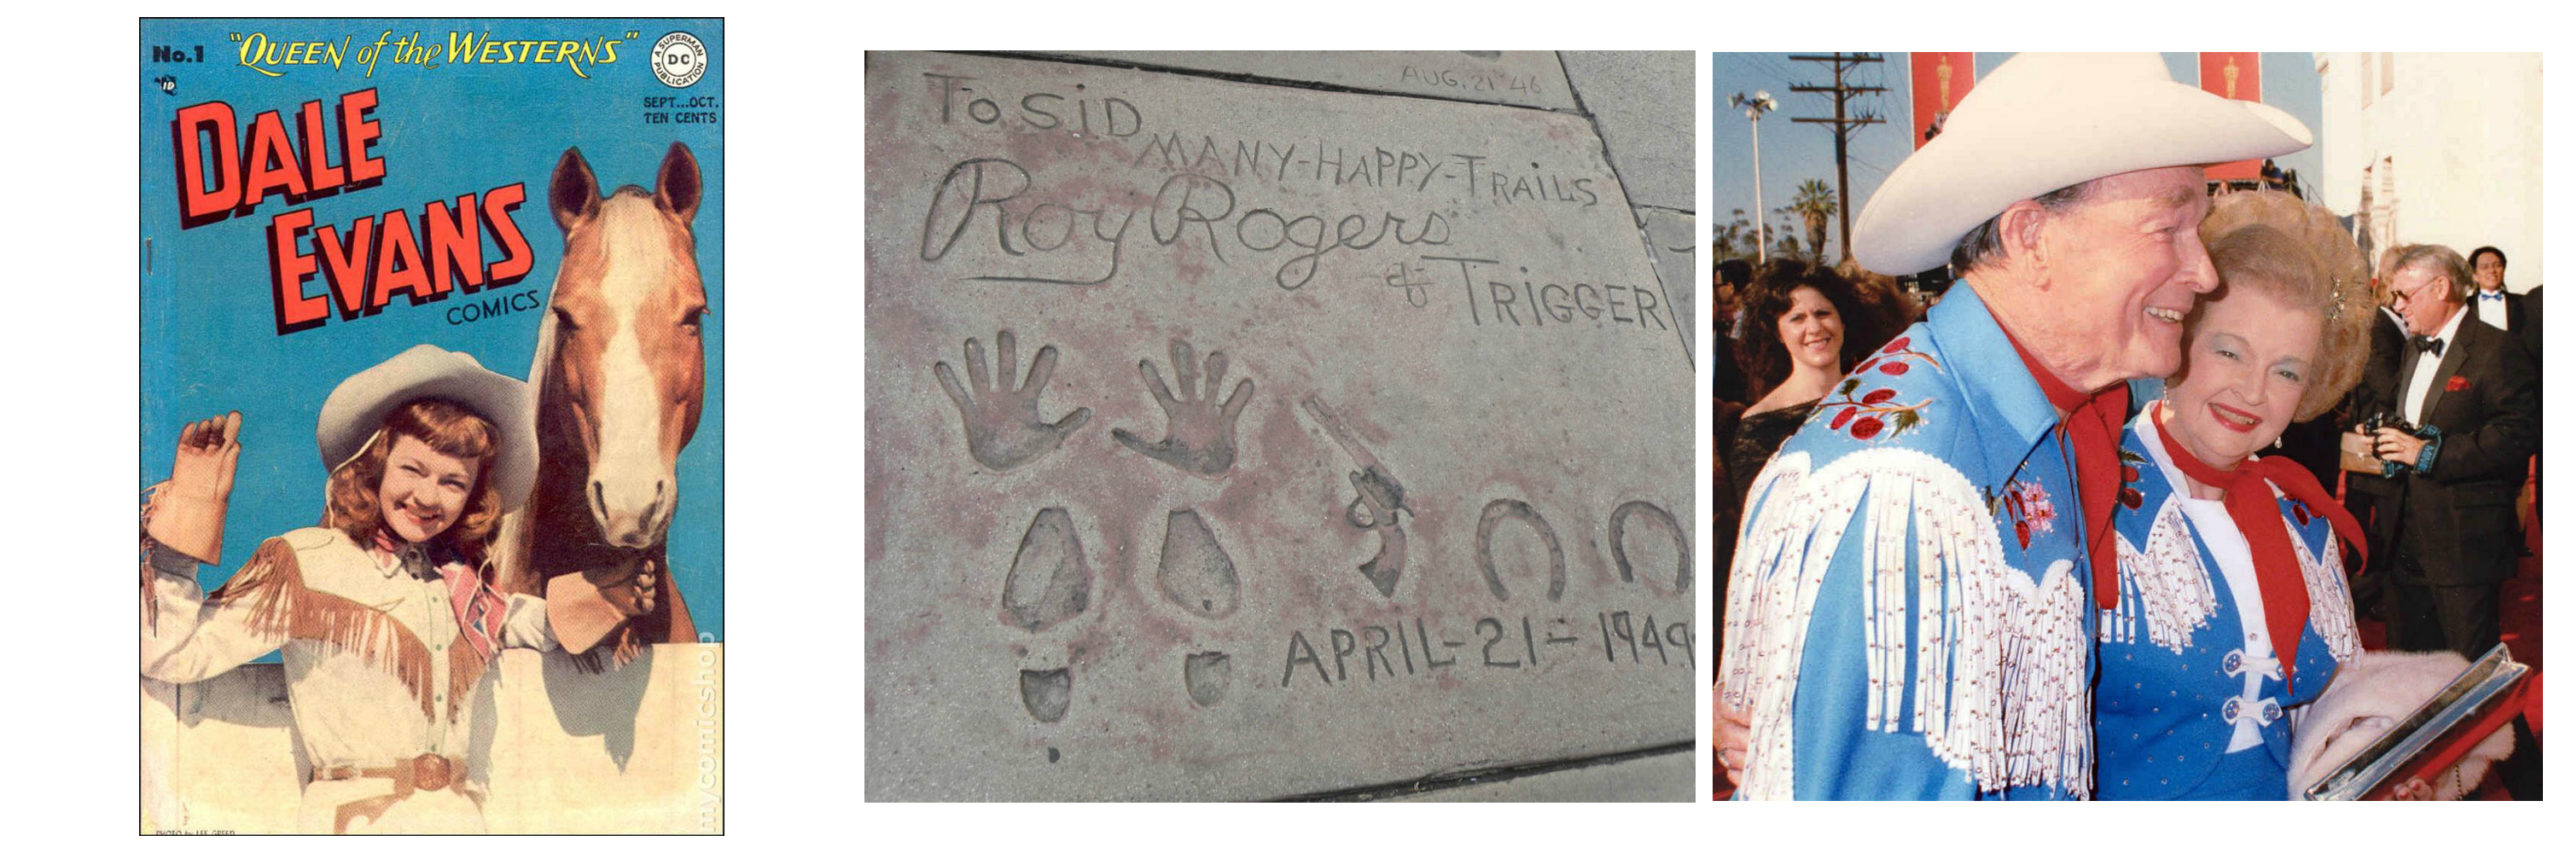 Left: Cover of Dale Evans comic book showing Evans in cowgirl gear with a palomino horse; Center: Signature and impressions in concrete noting To Sid, Many happy trails, Roy Rogers and Trigger, with handprints, footprints, and hoof prints. Right: Roy Rogers and Dale Evans in matching western wear.